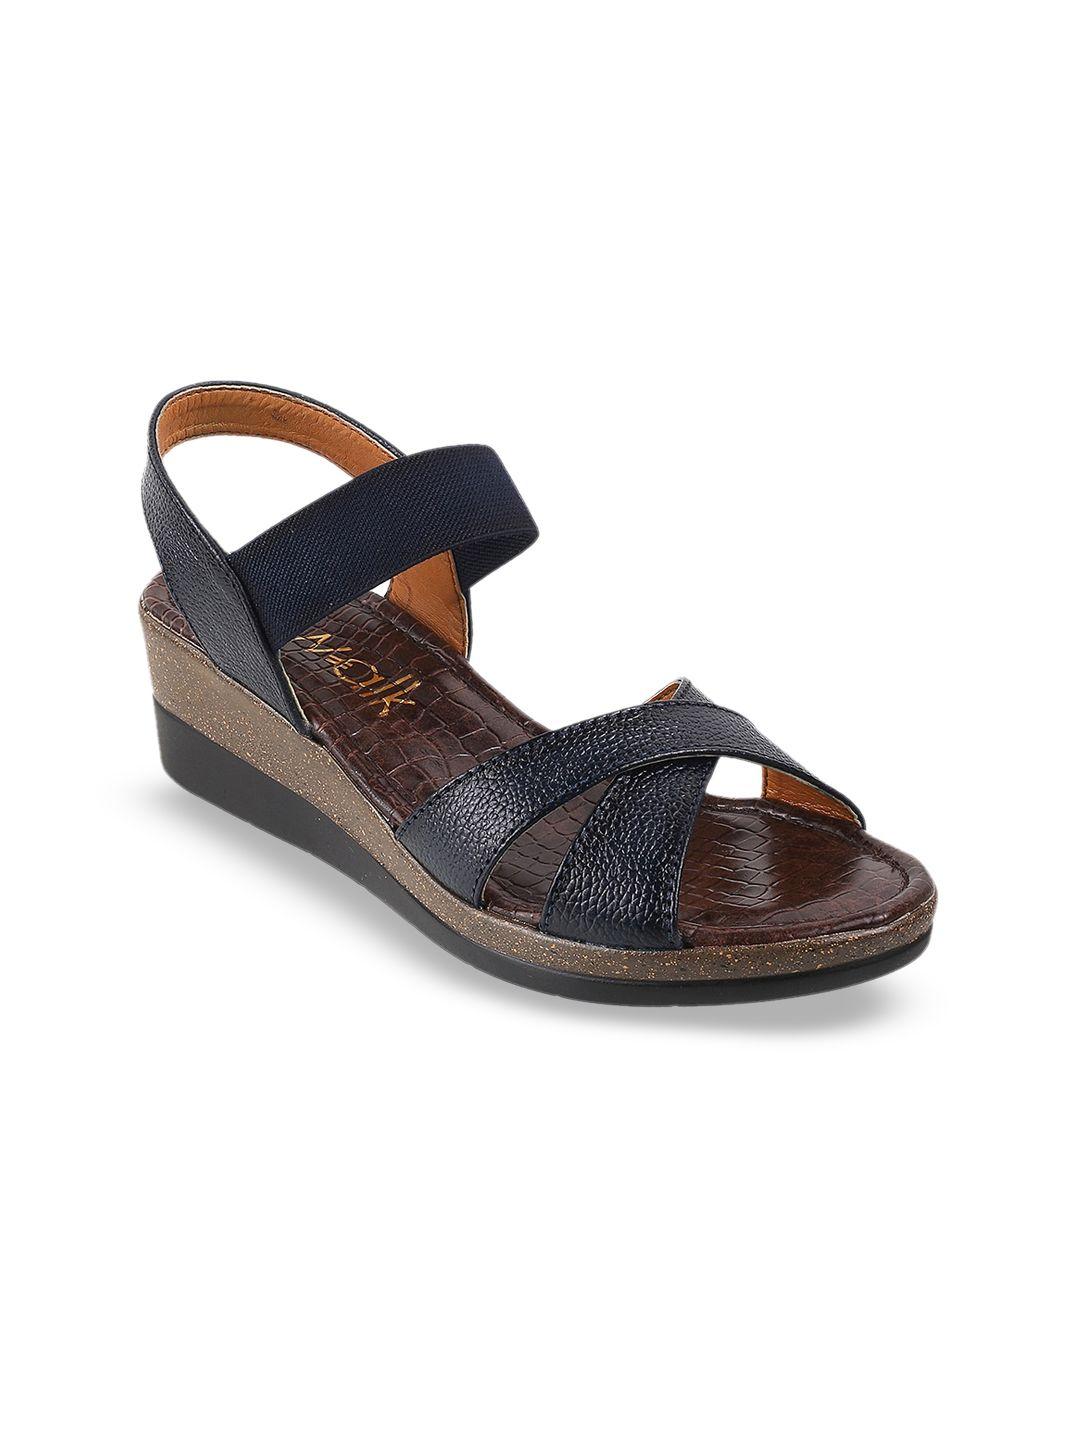 catwalk cross strap textured leather wedges with backstrap